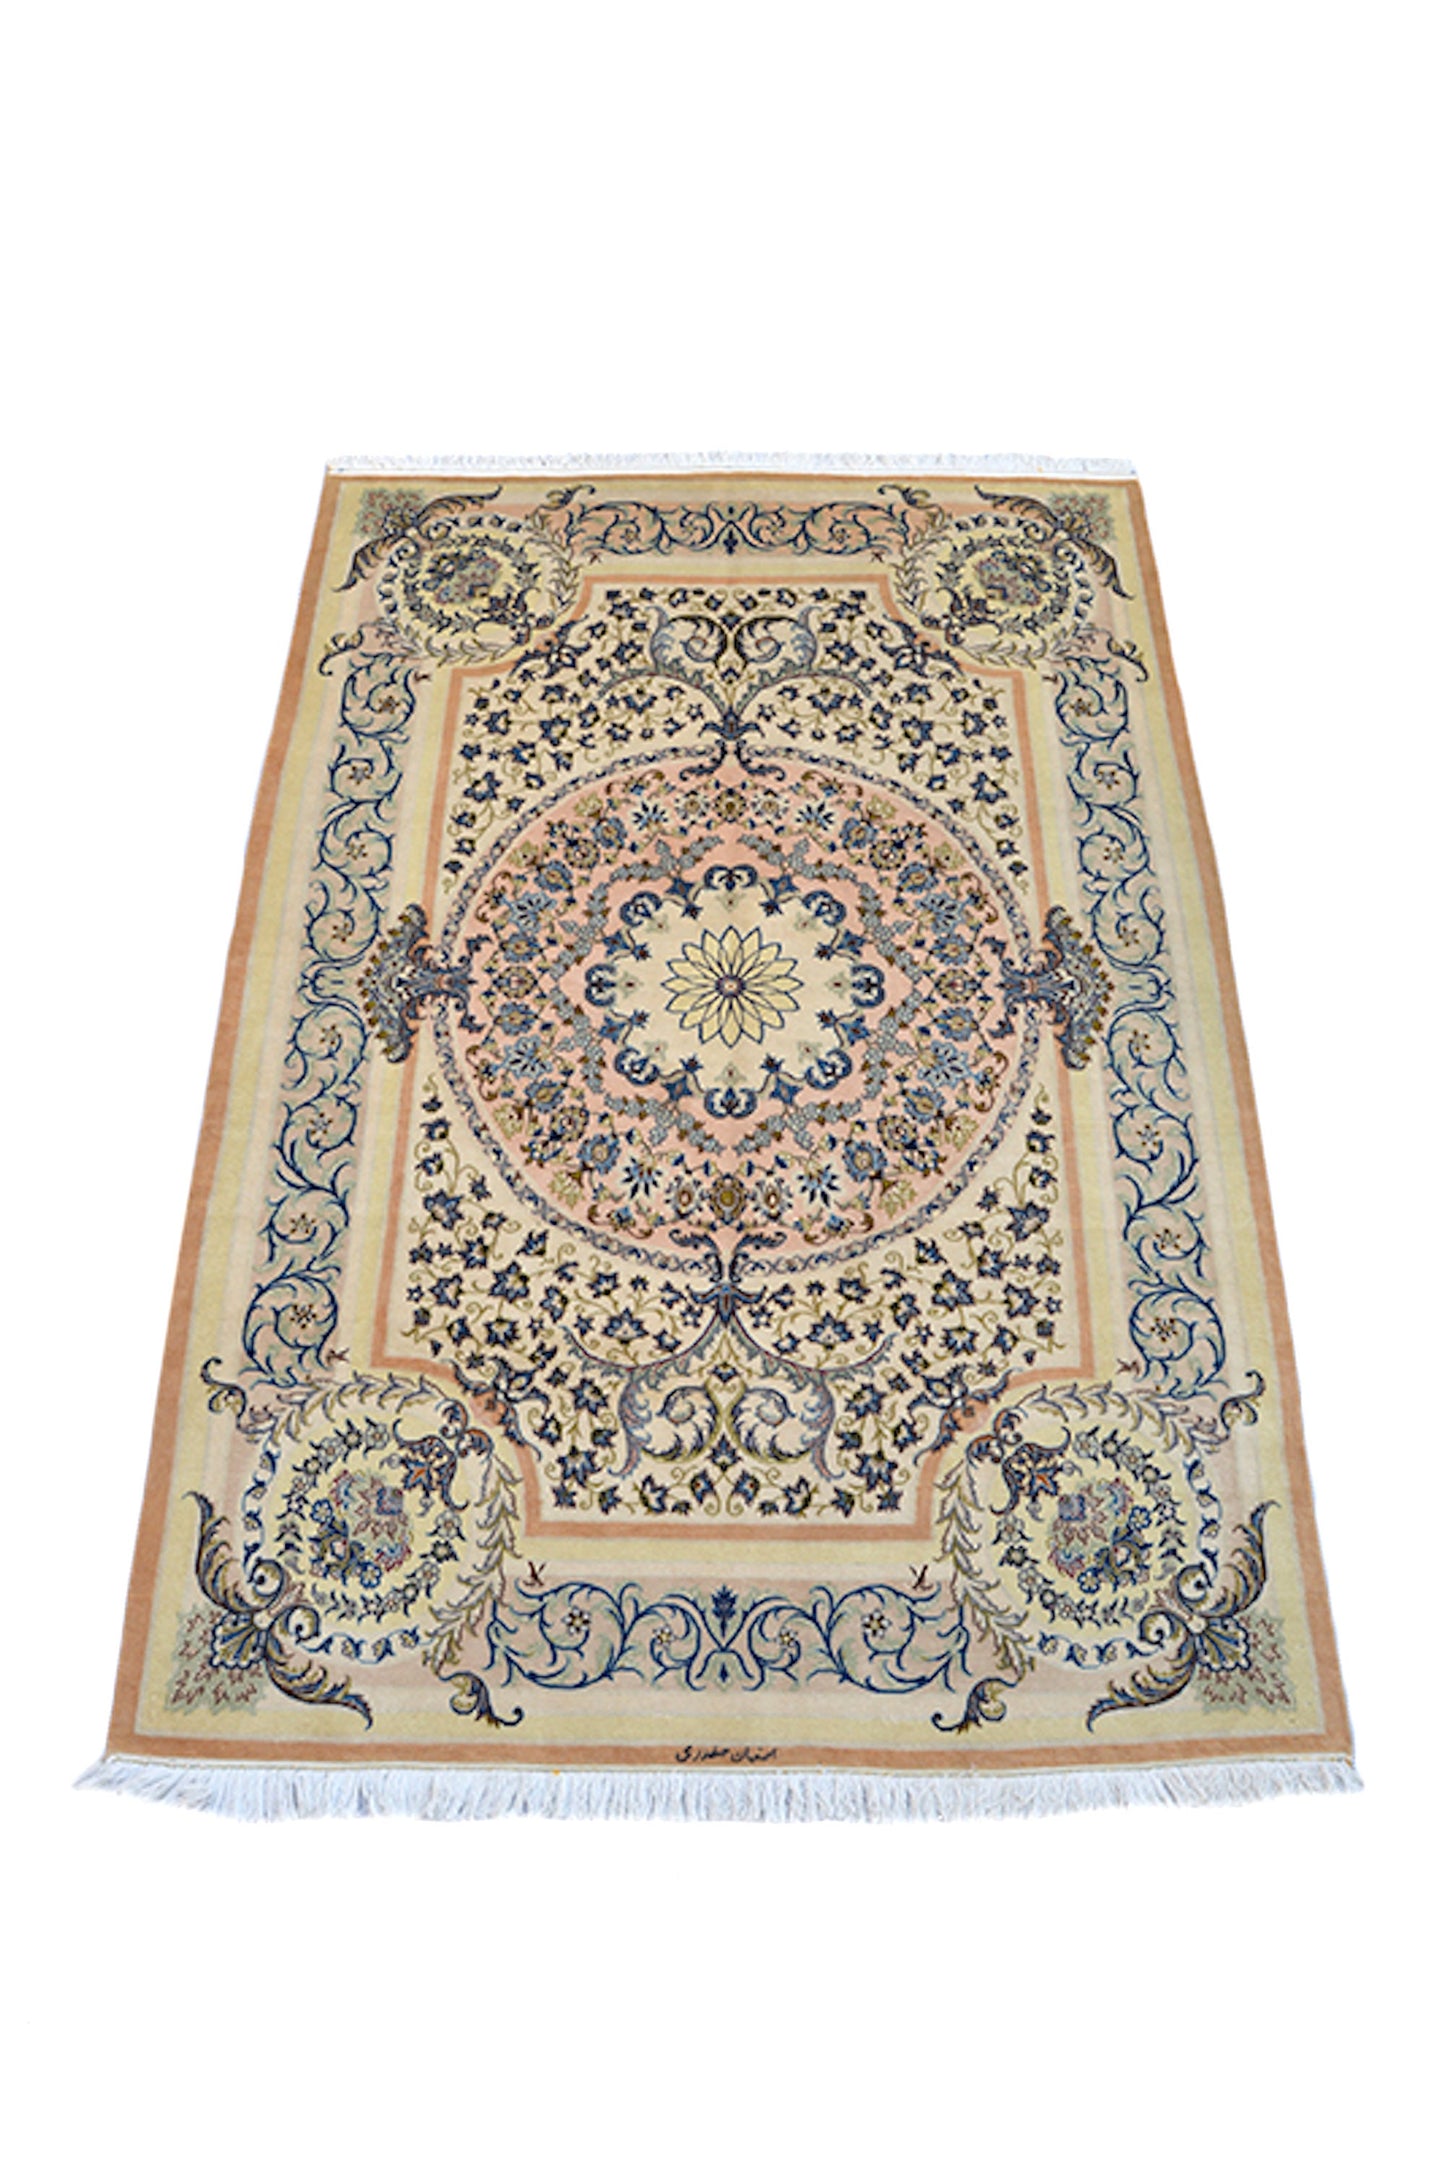 6 x 10 Feet Colorful Floral Medallion Rug | Hand Woven Area Rug | Oriental Persian Caucasian Rug | Bedroom Rug | Wool Traditional Vintage